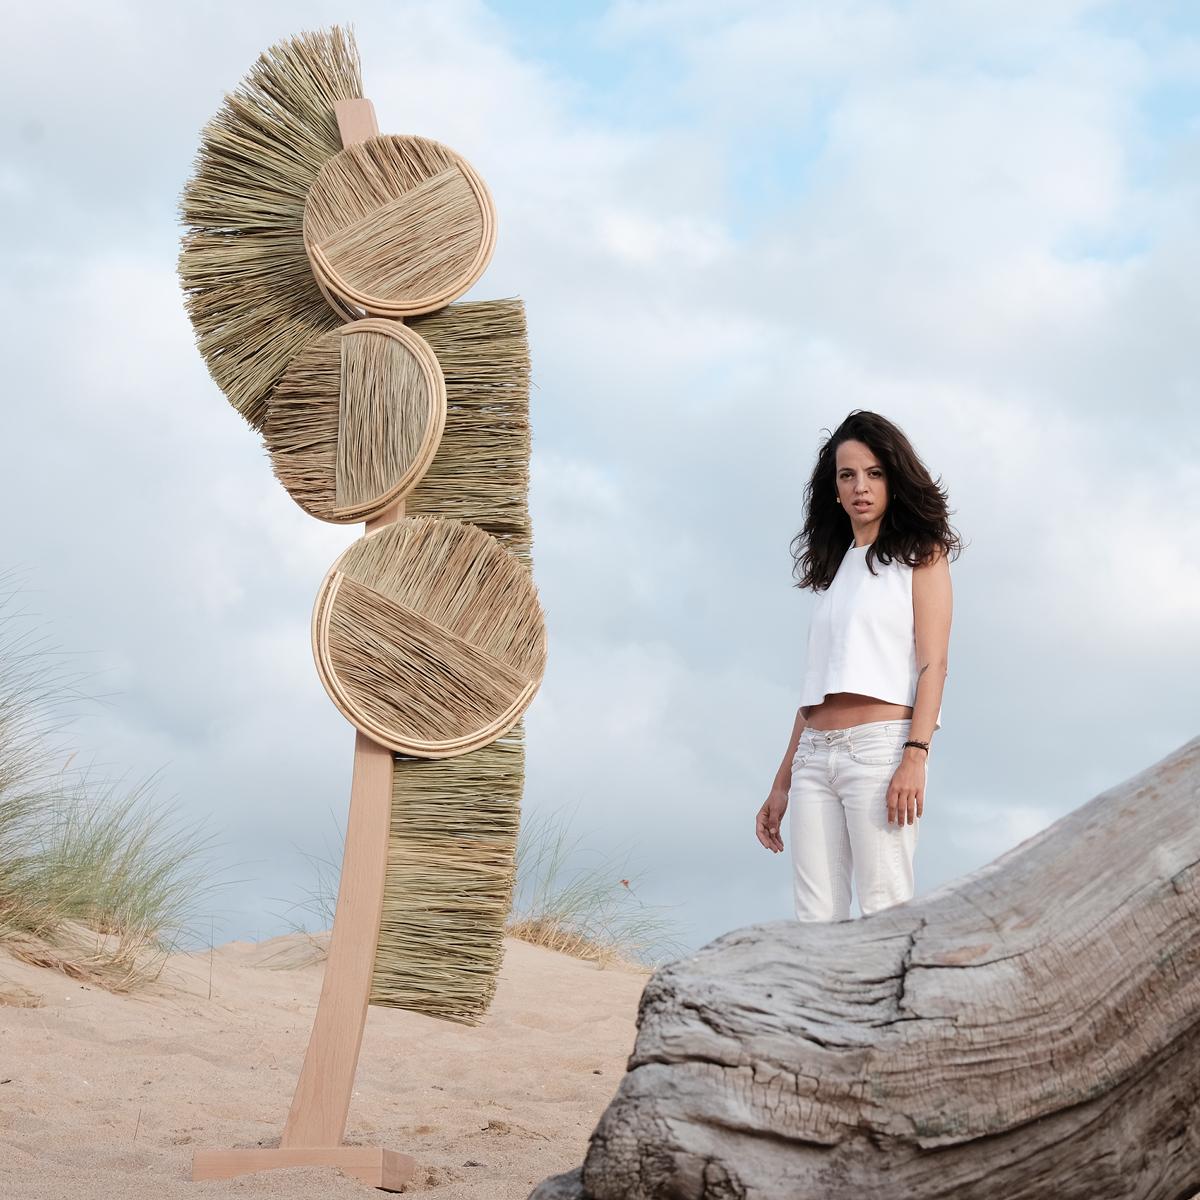 An organic modern abstract sculpture crafted in Spain by Gabriela de Sagarminaga. This sculpture is handcrafted with esparto grass and topped with strips of pith. The pole and the platform where it sits are made of beech wood. This sculpture has